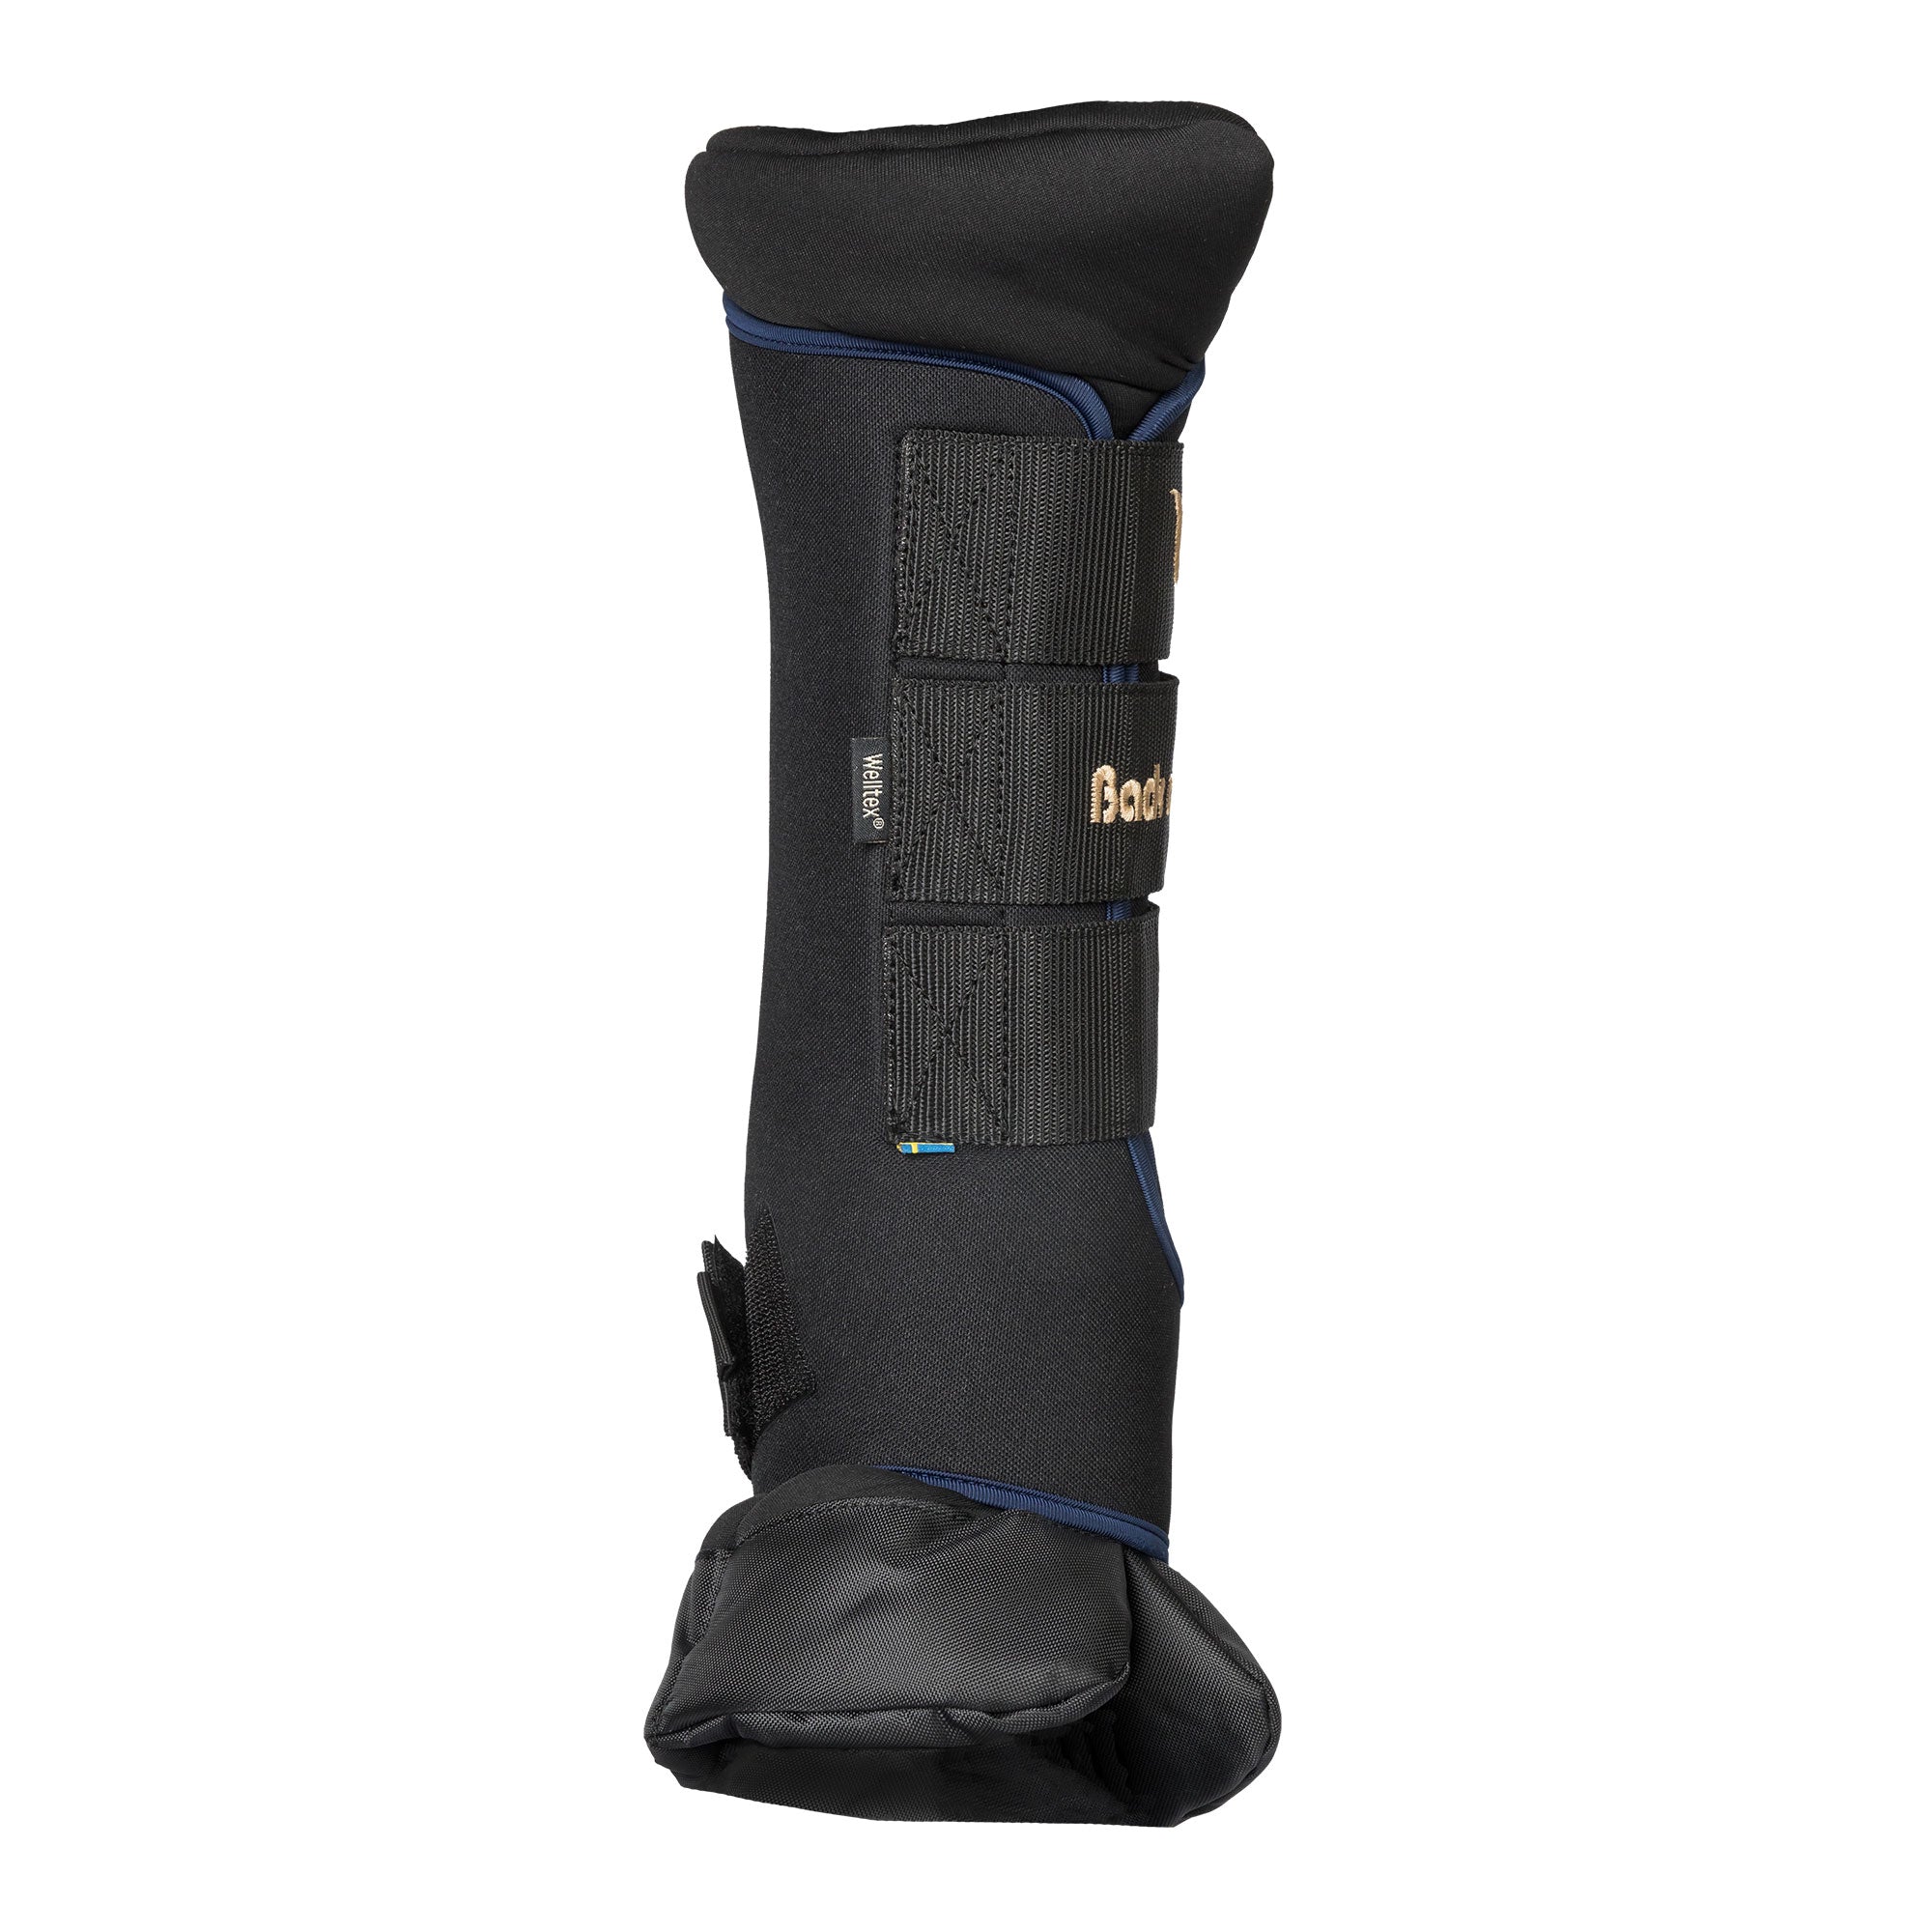 Royal Stable Boots Deluxe - Paire